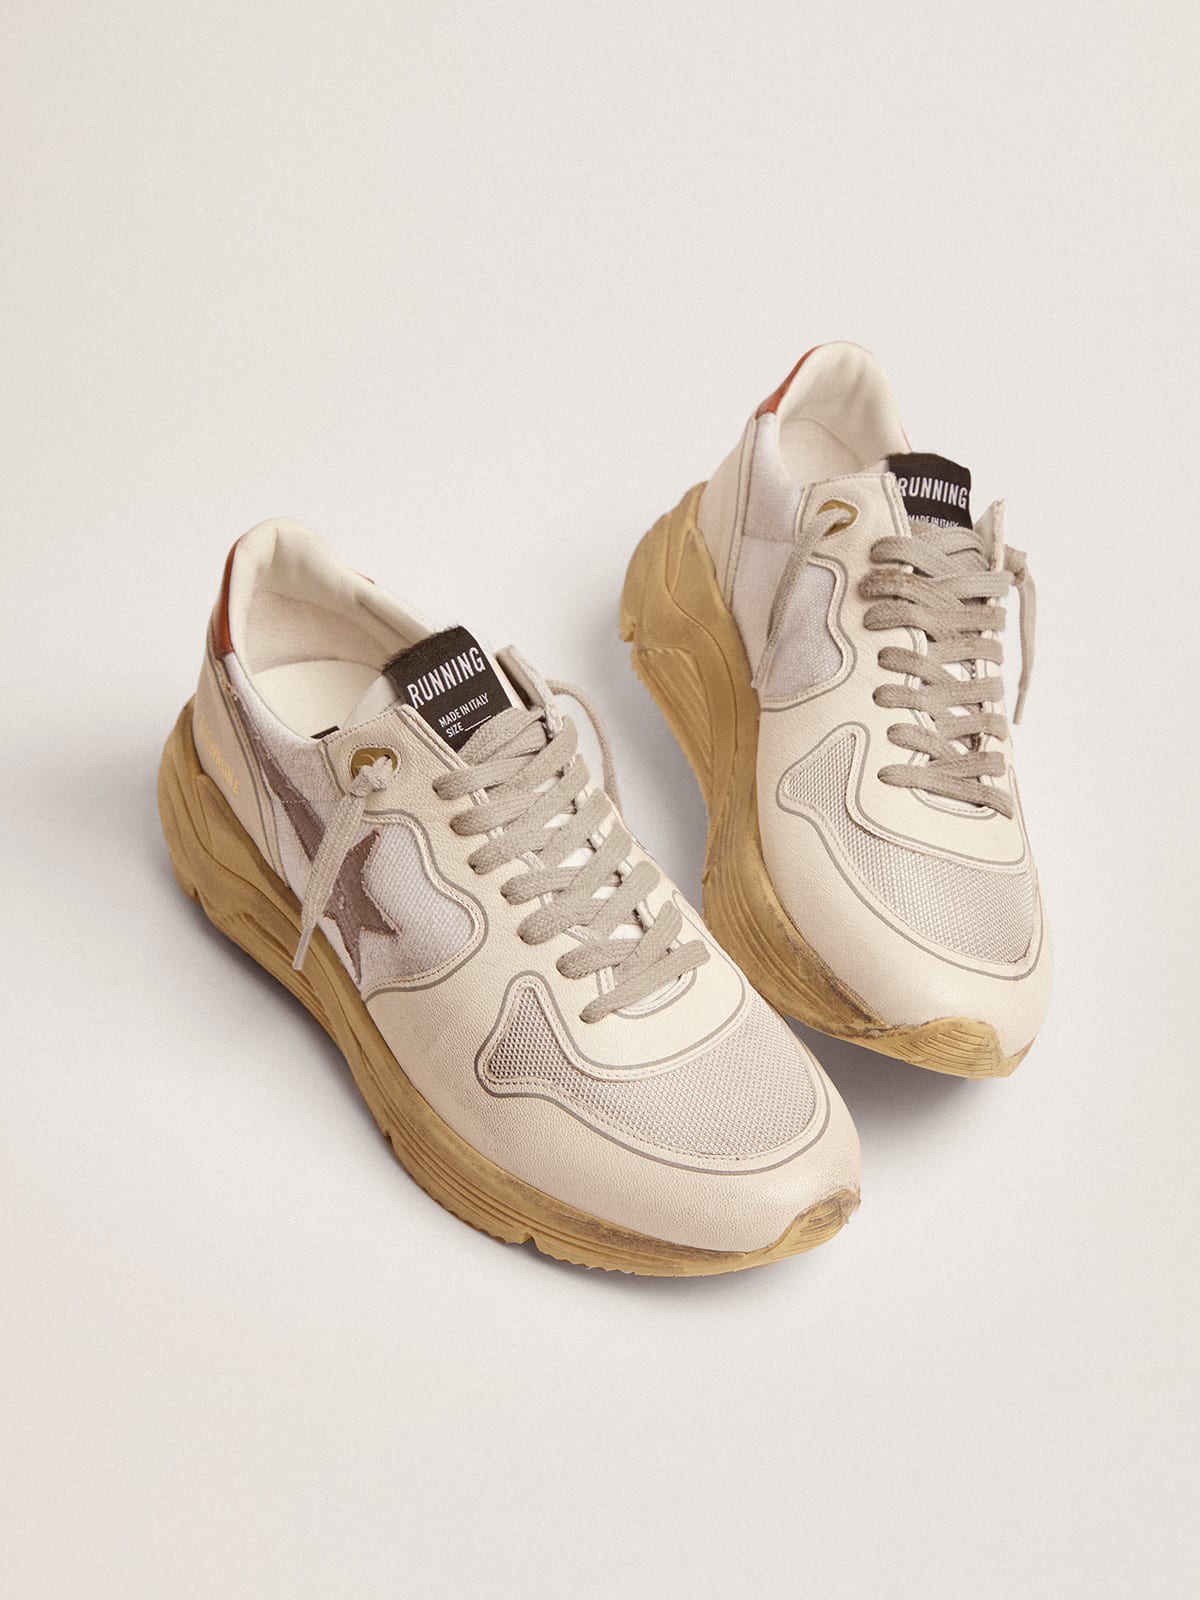 Golden Goose - Men's Running Sole LTD with brown leather star in 